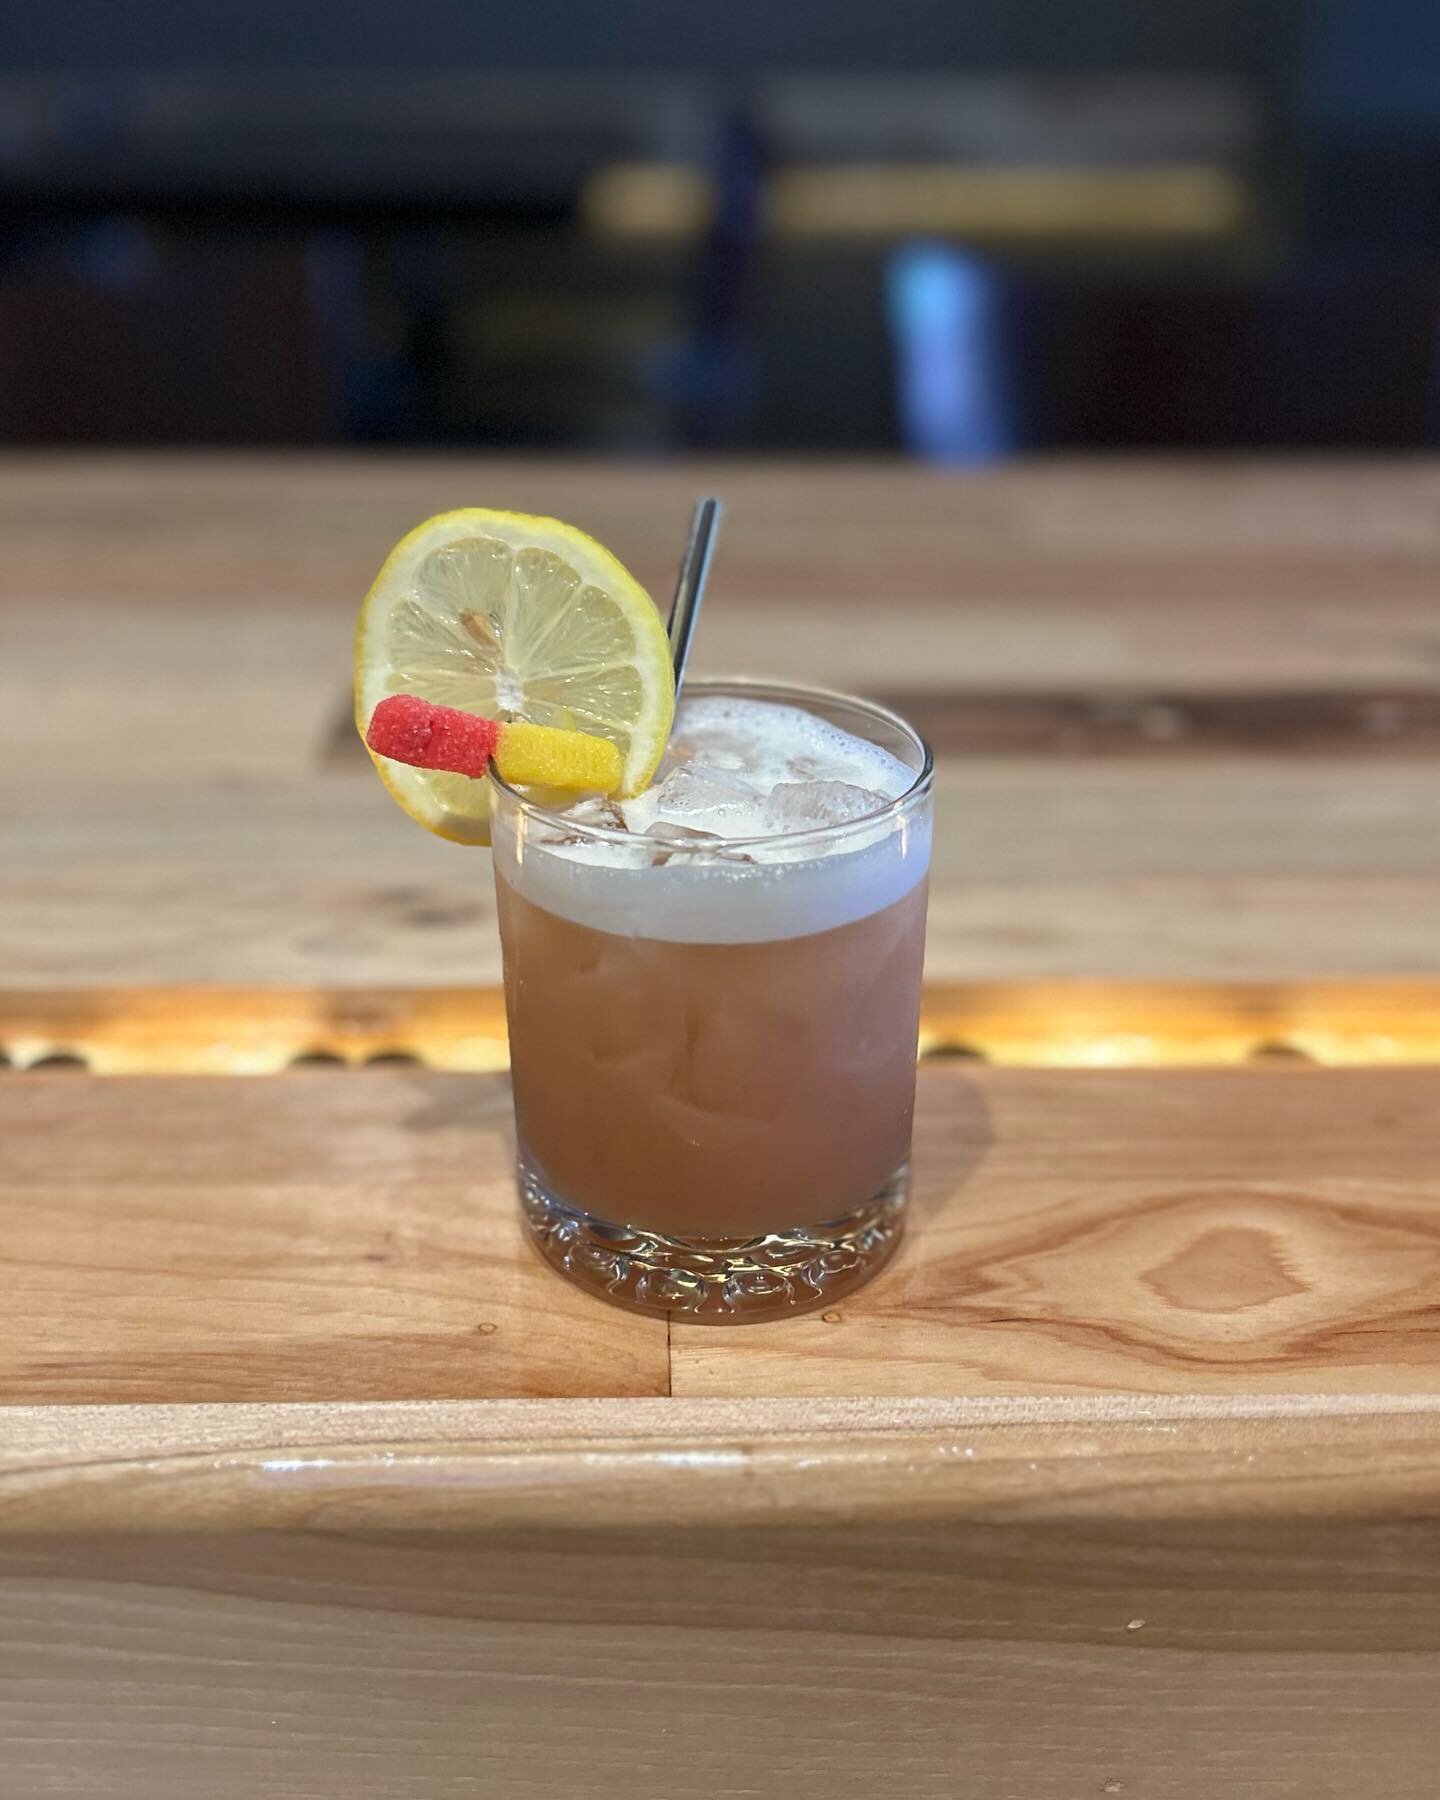 Sip, stir, and summon the spirits with our hauntingly delicious &ldquo;Beetlejuice&rdquo; cocktail, so good it&rsquo;ll have you saying the name three times for more 🎃👻